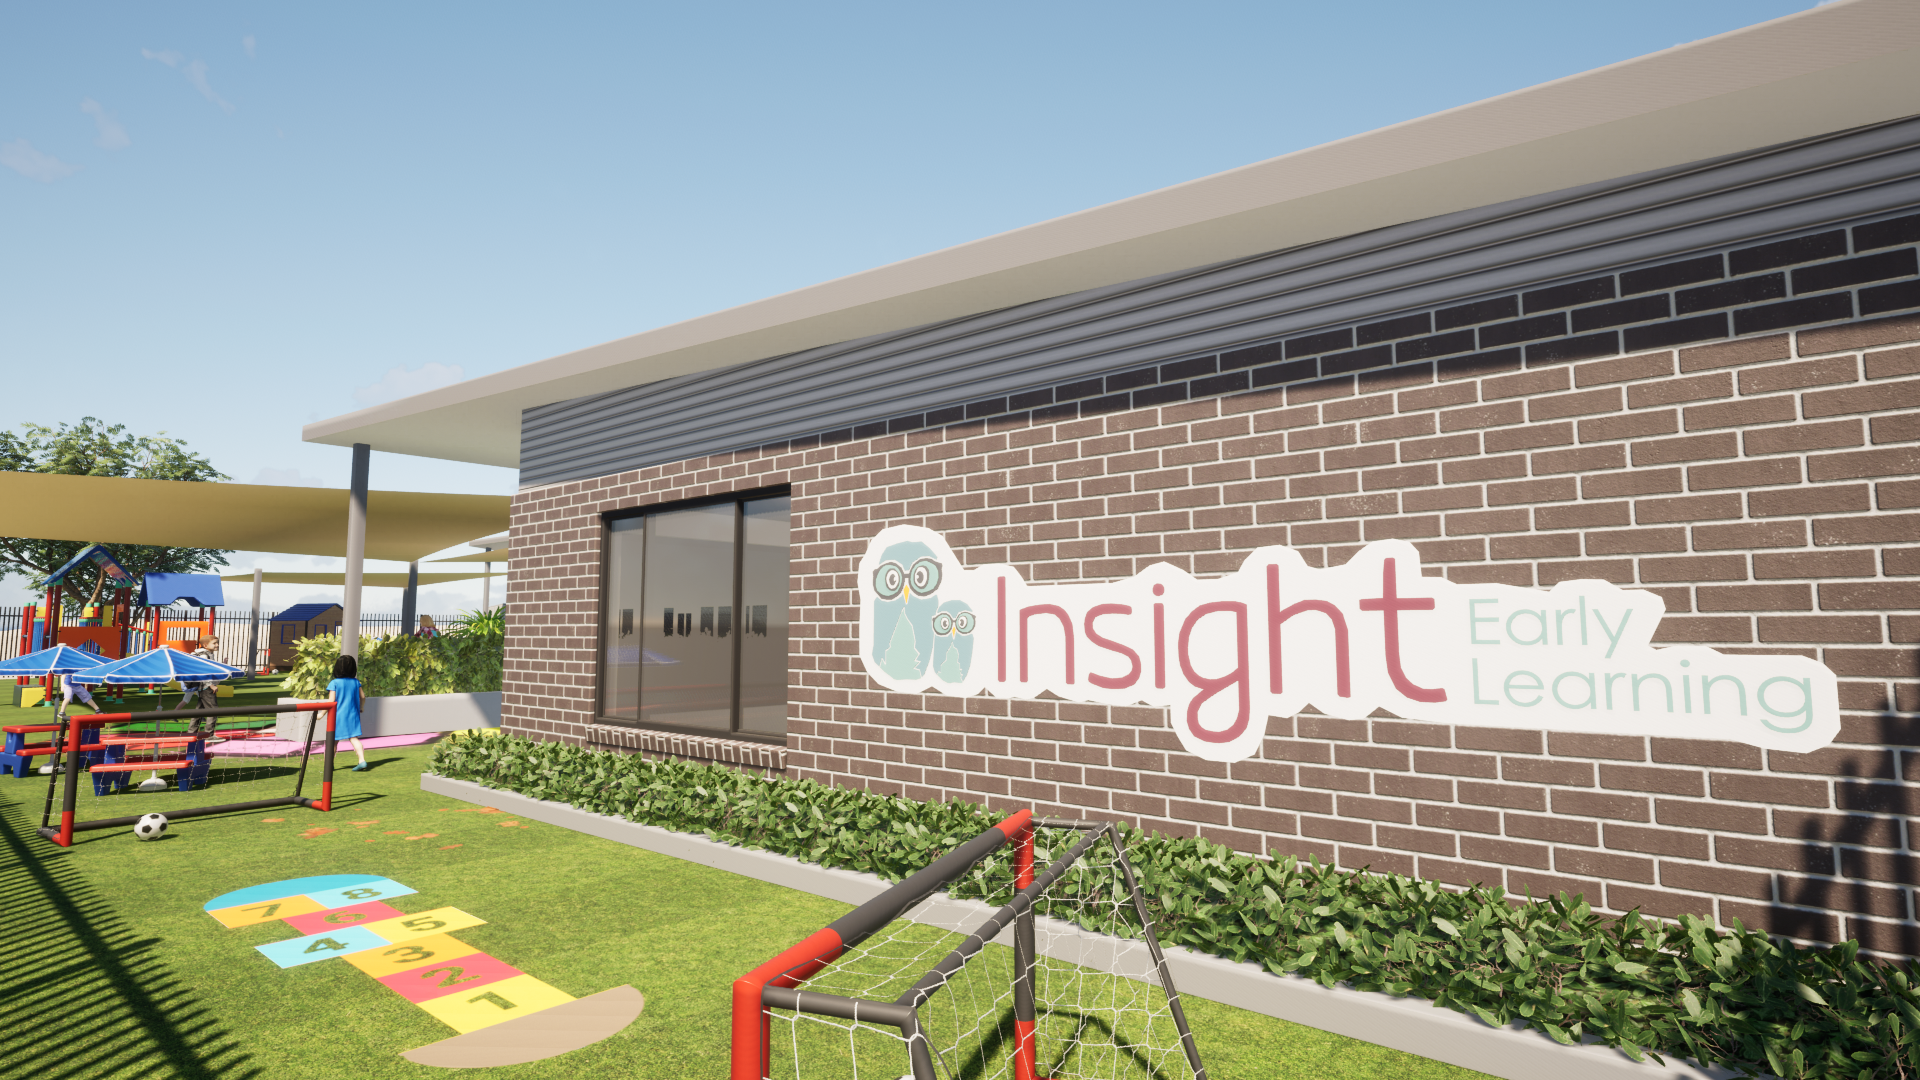 Second Insight Early Learning childcare centre in Southlakes Estate under construction